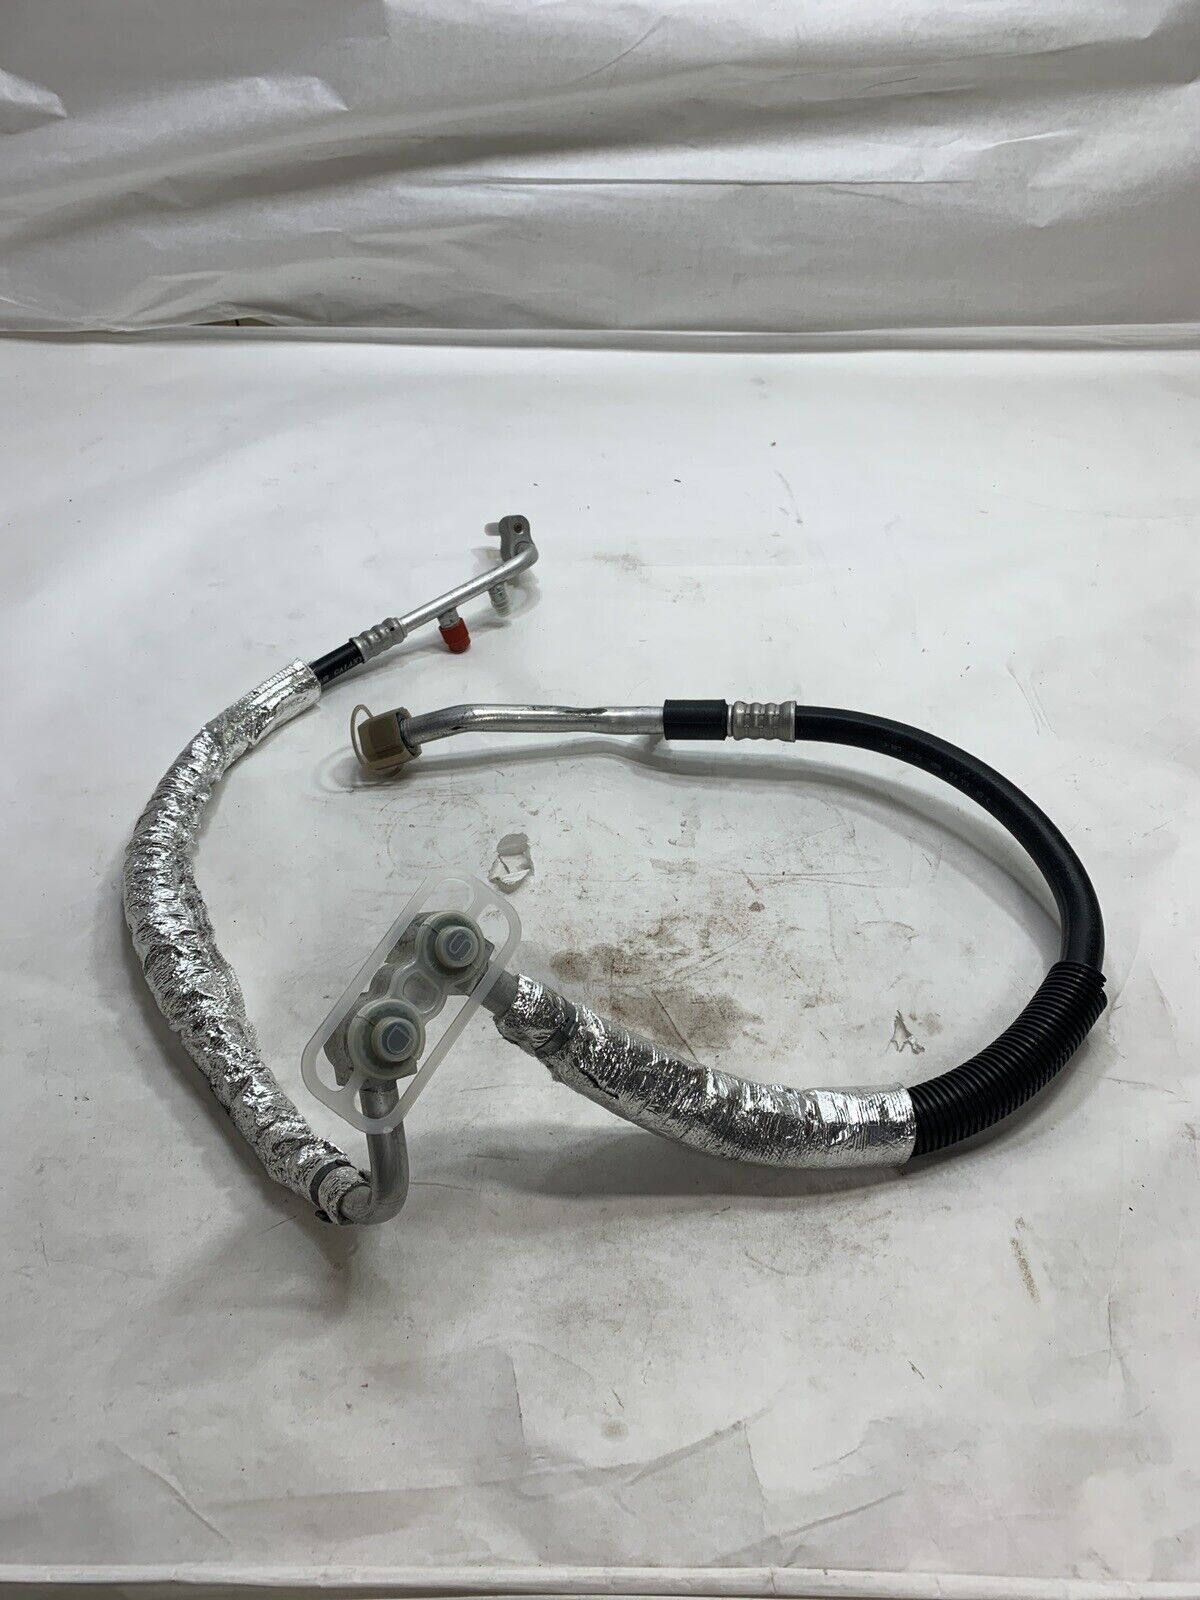 New OEM GM Manifold Hose Suction & Discharge Assembly 22656461